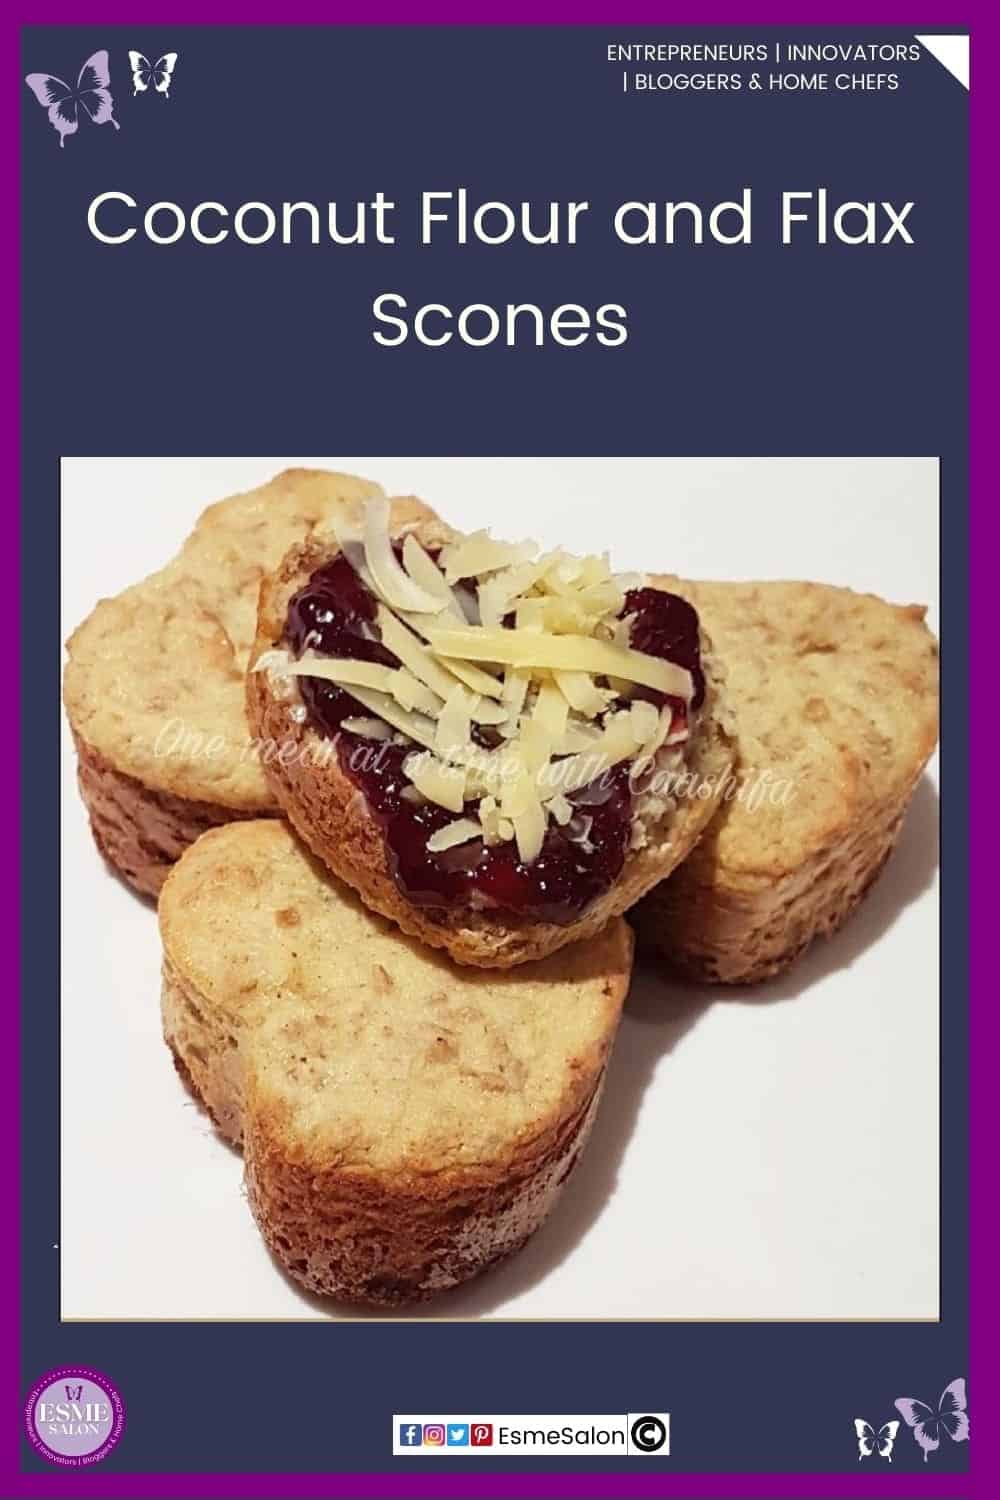 an image of 4 heart shaped Coconut Flour and Flax Scones with jam and shredded cheese